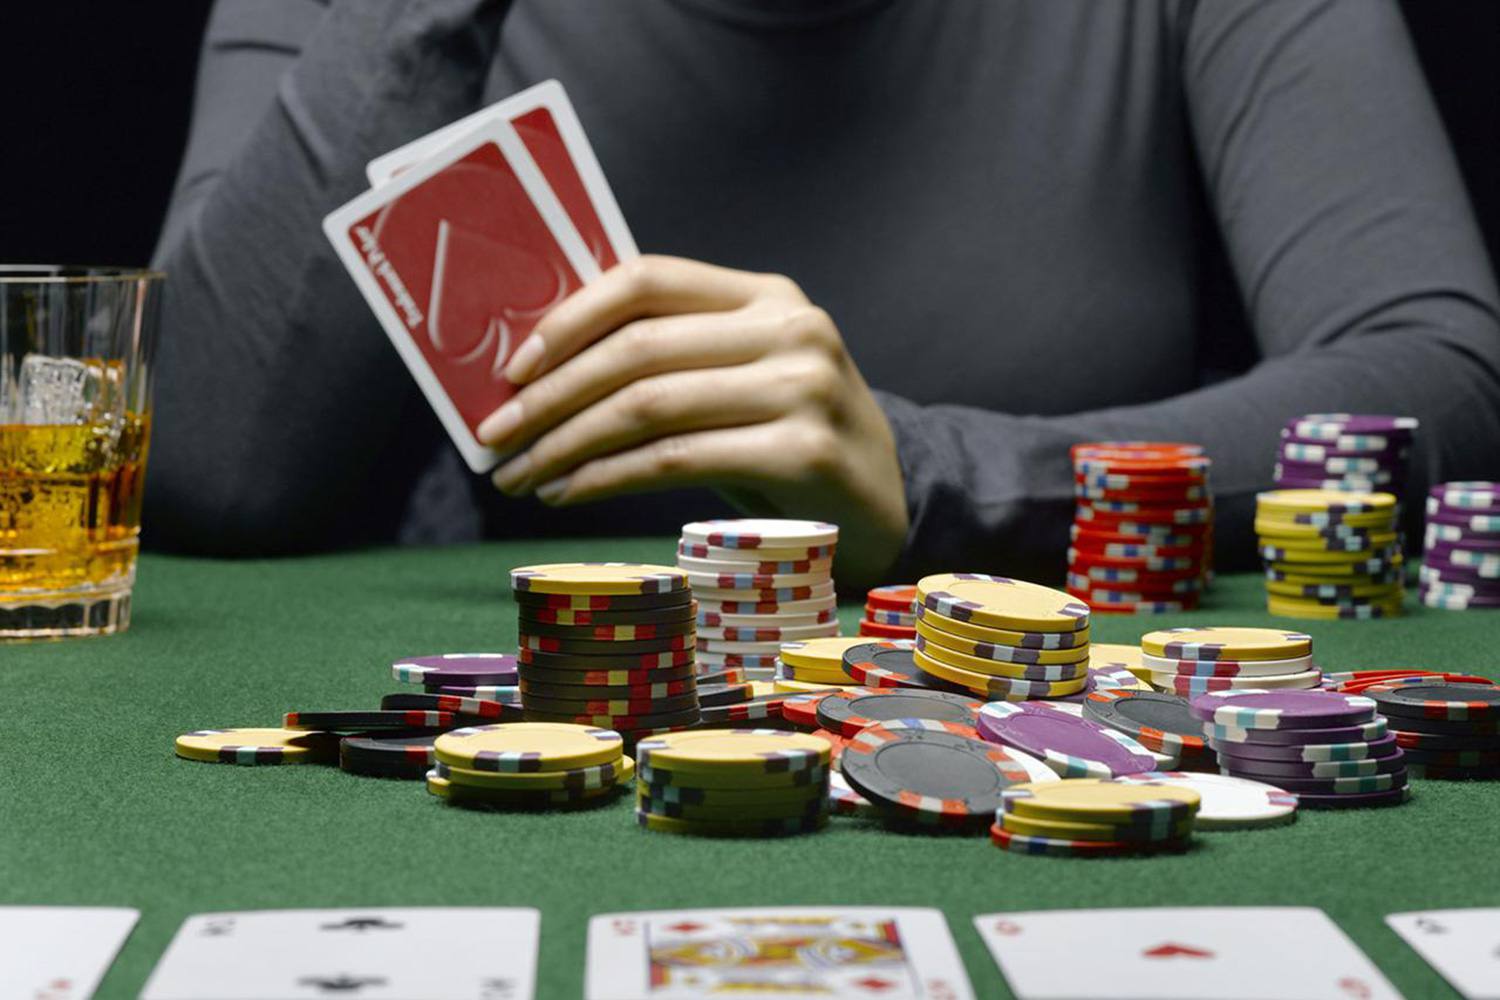 a-poker-player-lies-about-cancer-diagnosis-to-enter-world-series-of-poker